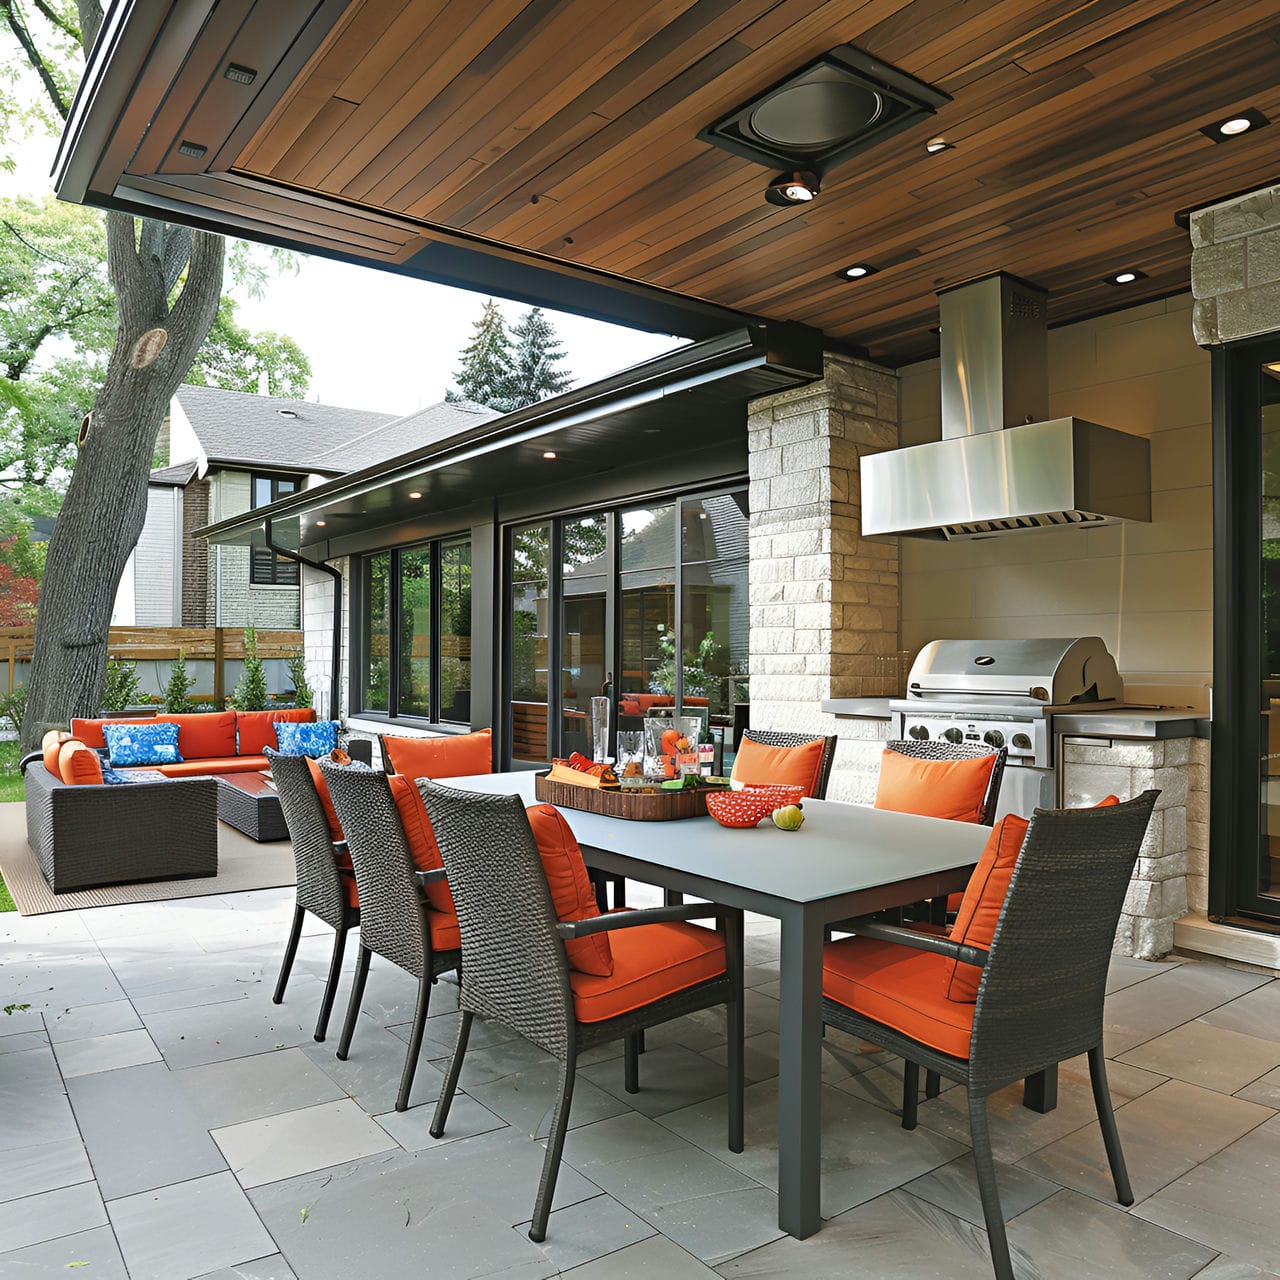 Terrace: size, functionality, uses, furniture and renovation